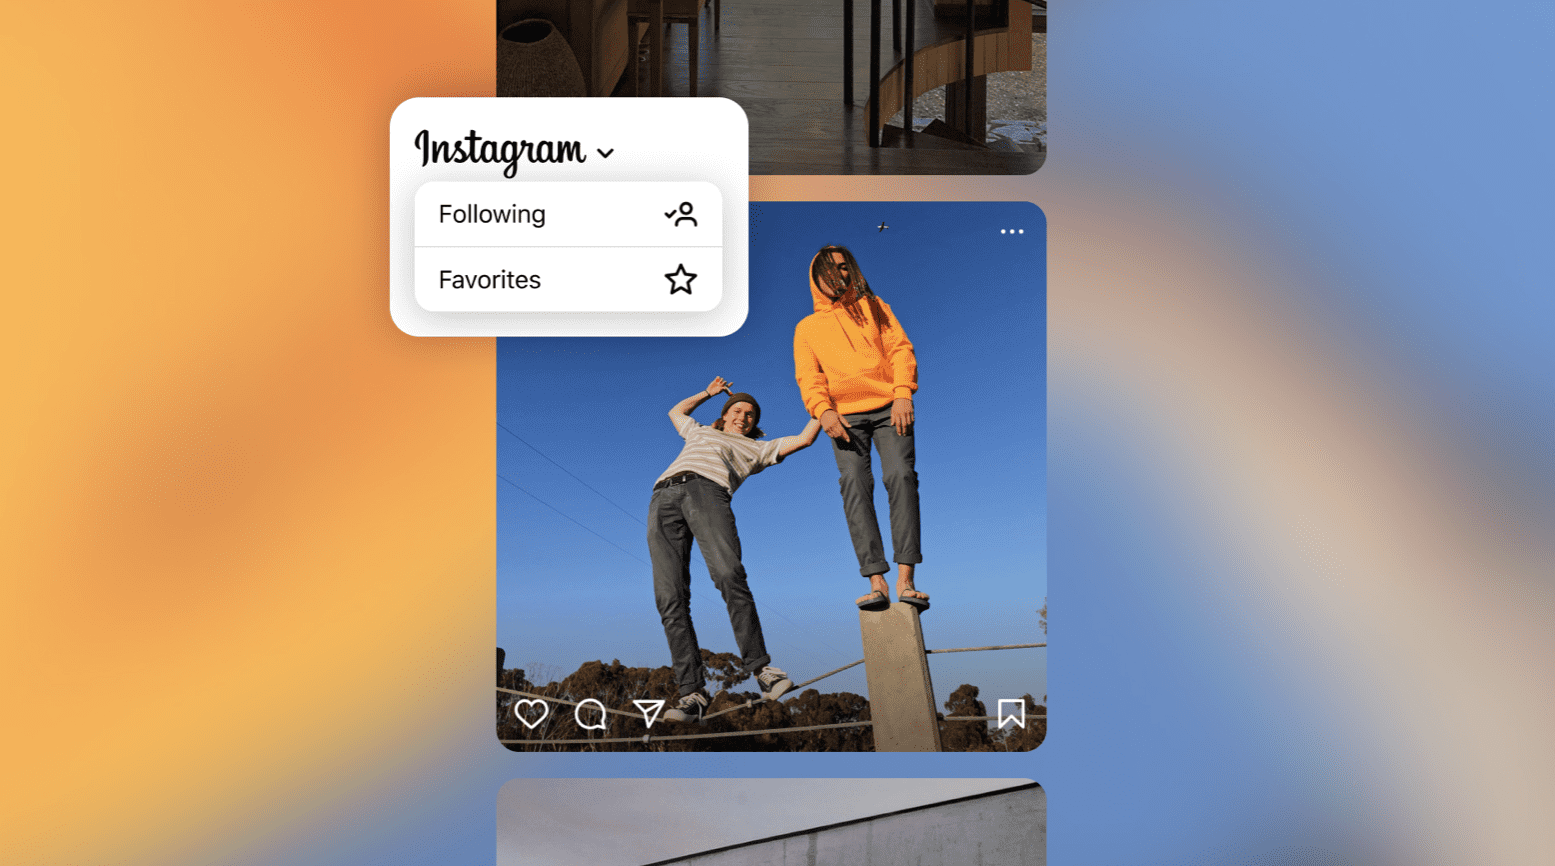 What Does the Redesigned Instagram Content Feed Mean to Brands?